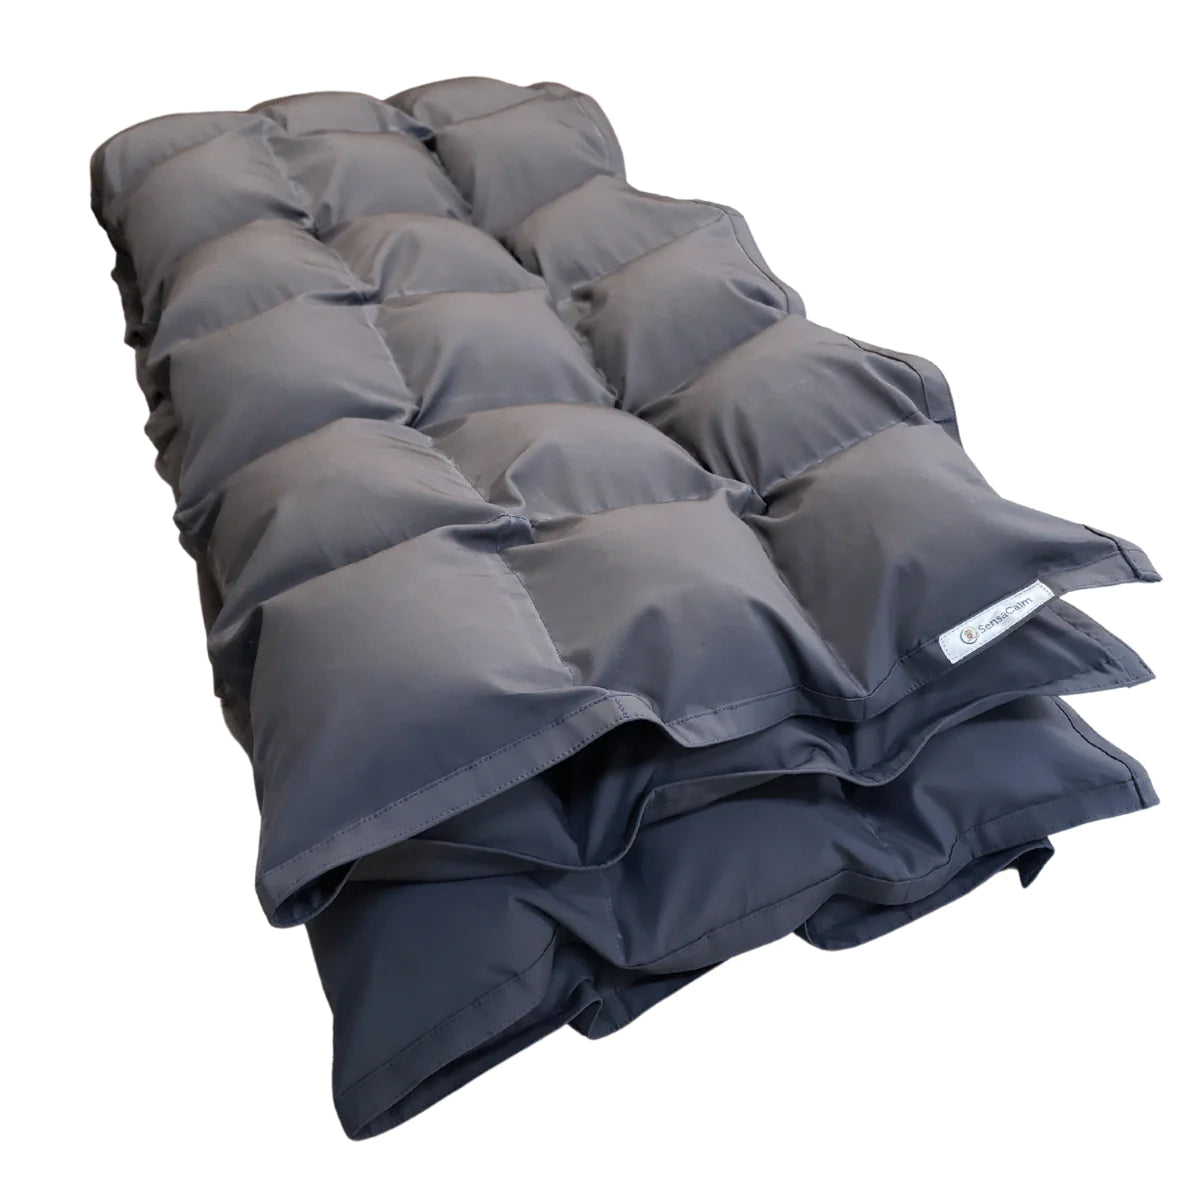 Clearance Super Cool Weighted Blanket - Large 14 lb Gray Cotton No Polyfil (for 130 lb user) no polyfill